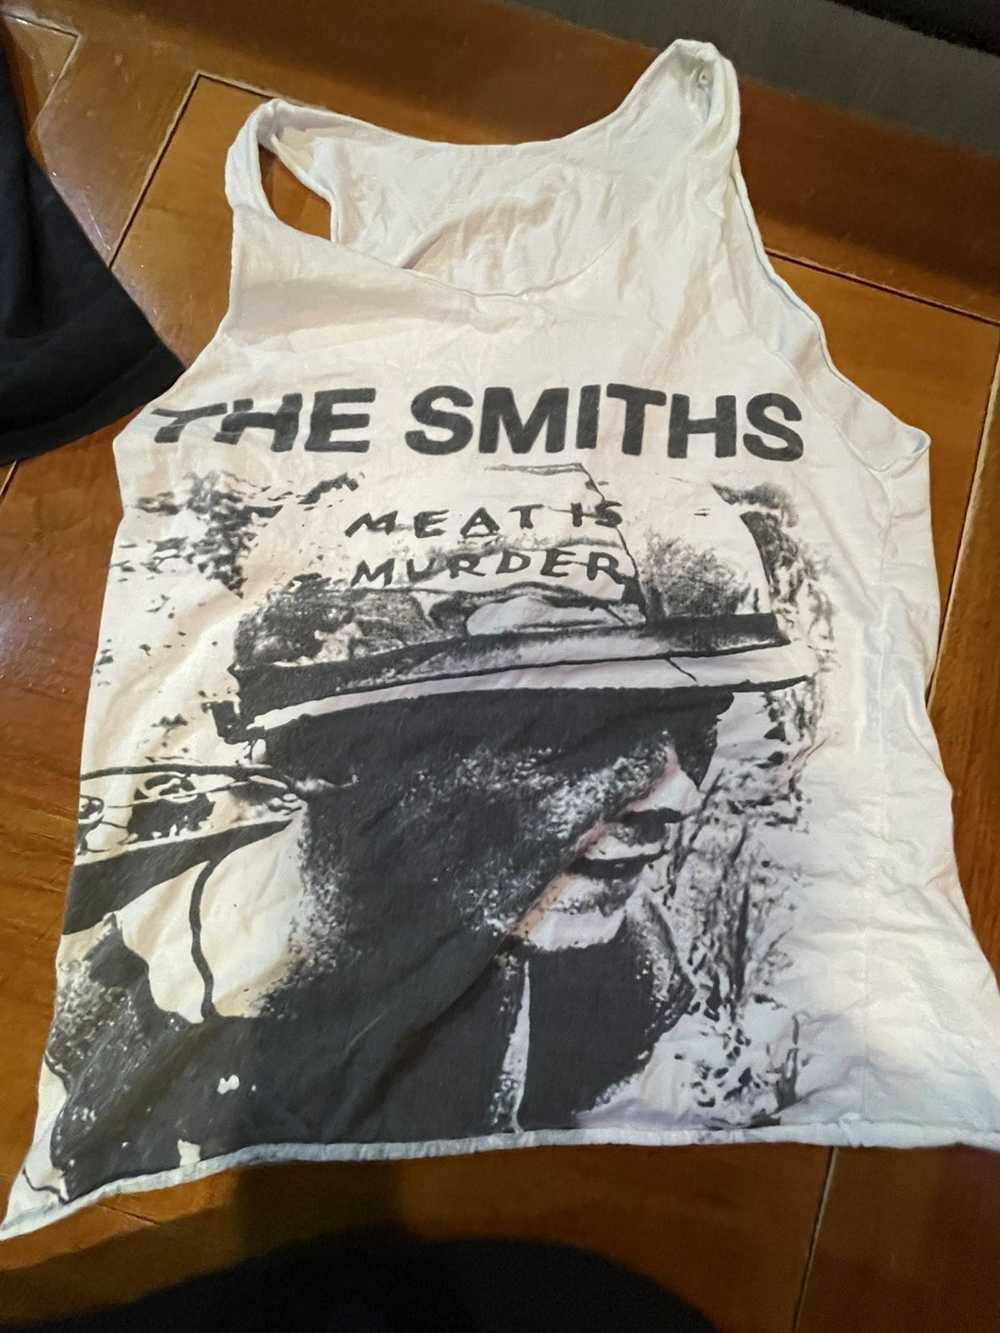 The Smiths Meat is Murder Smiths tank top - image 1